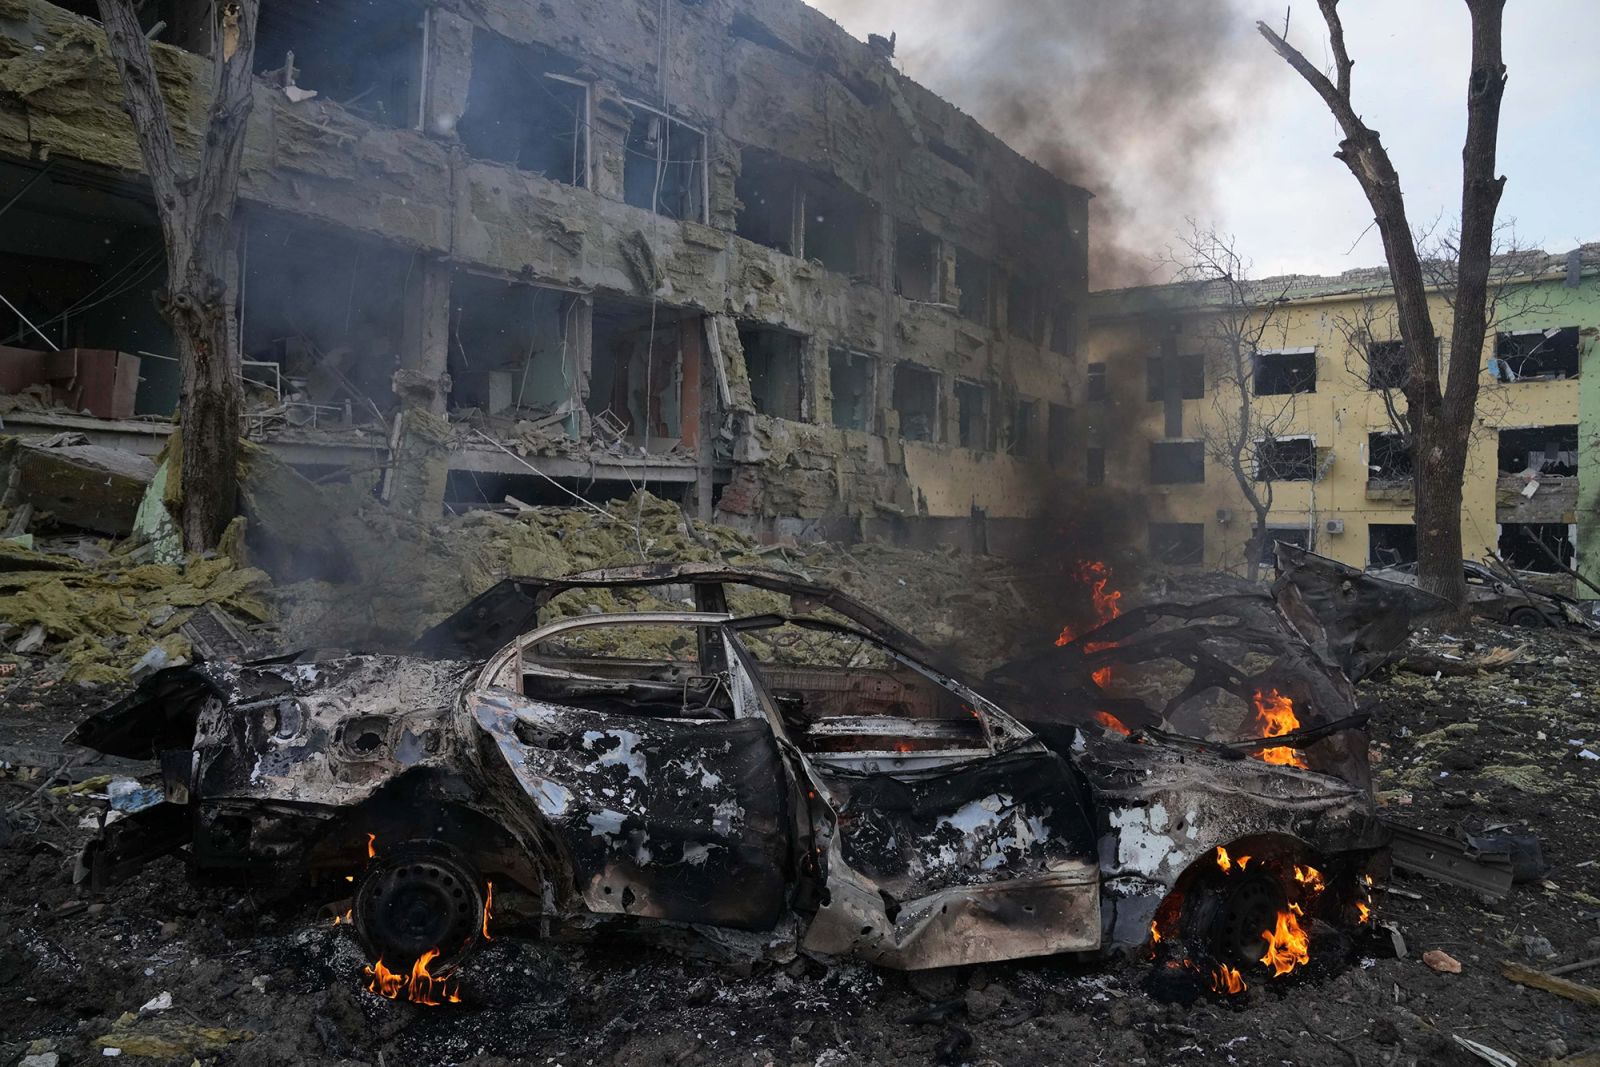 Mariupol A car gutted outside the wreck of the Maternity Hospital Photo Evgeniy Maloletka, Associated Press